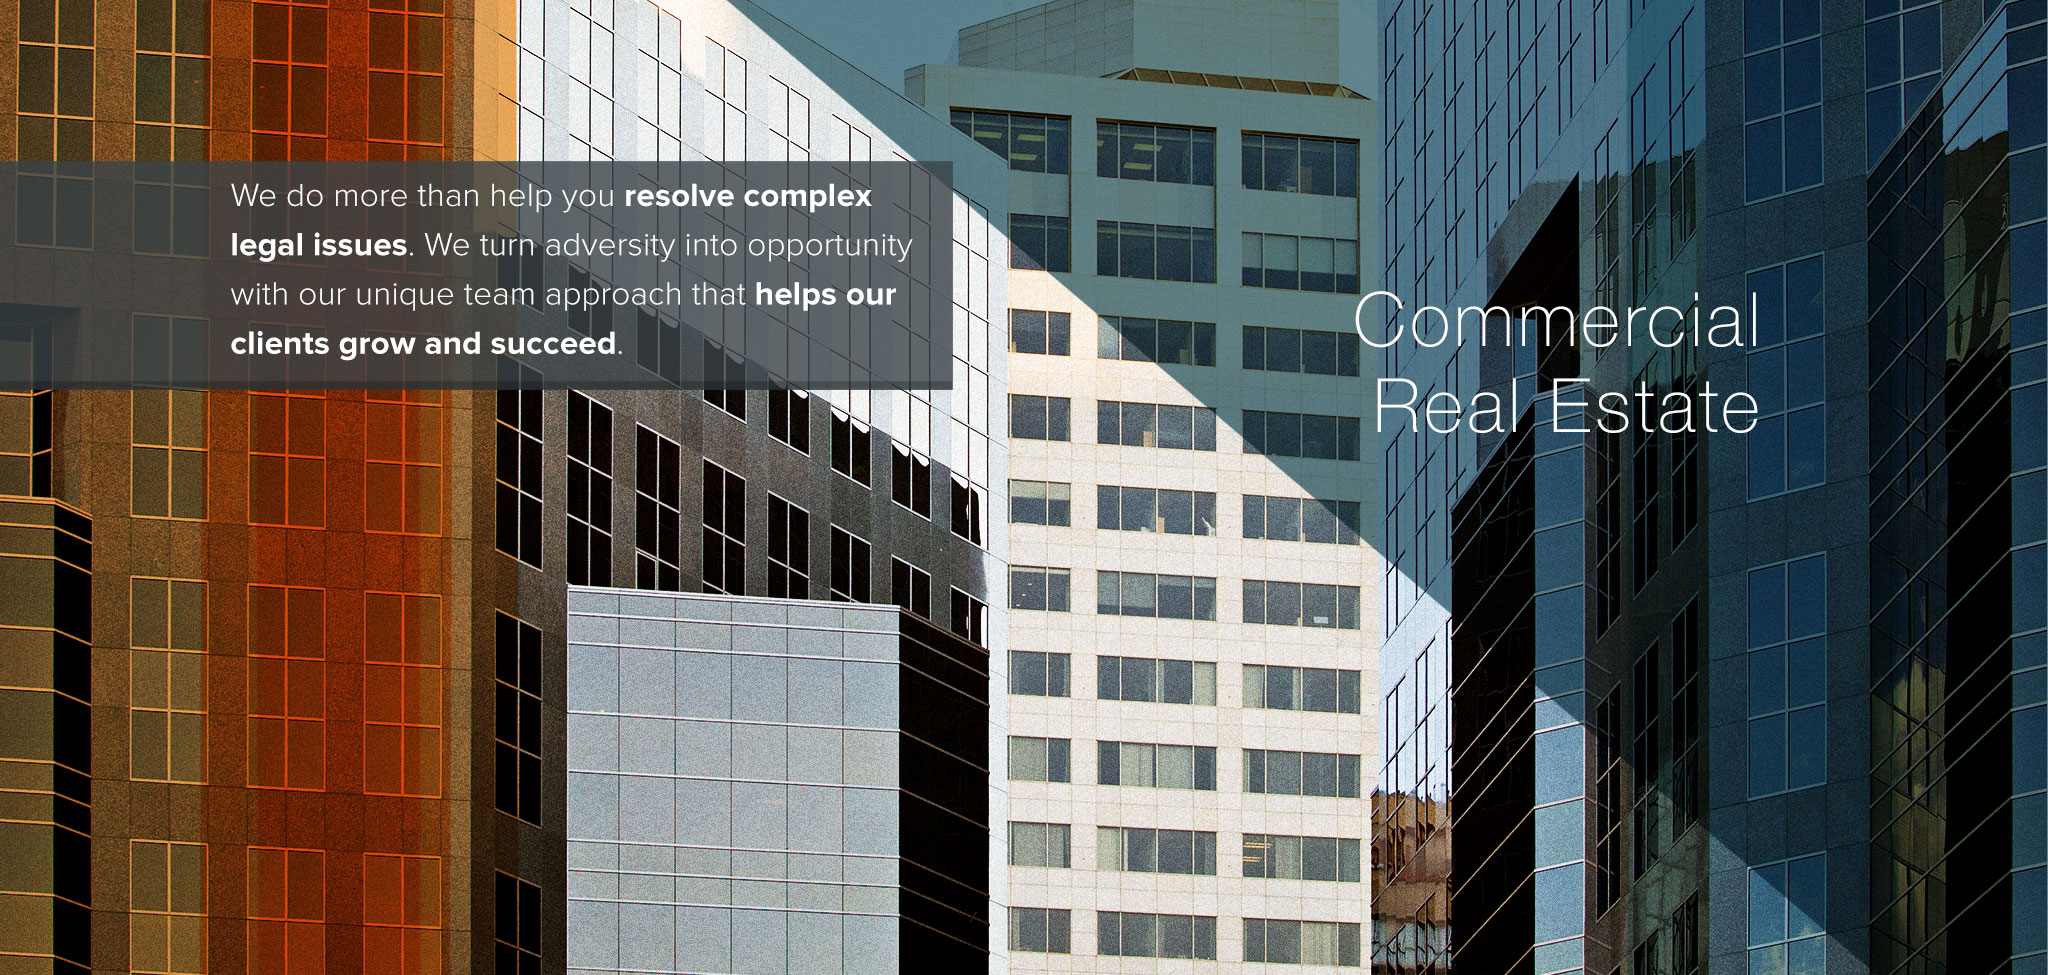 Commercial Real Estate. We do more than help your resolve complex legal issues.